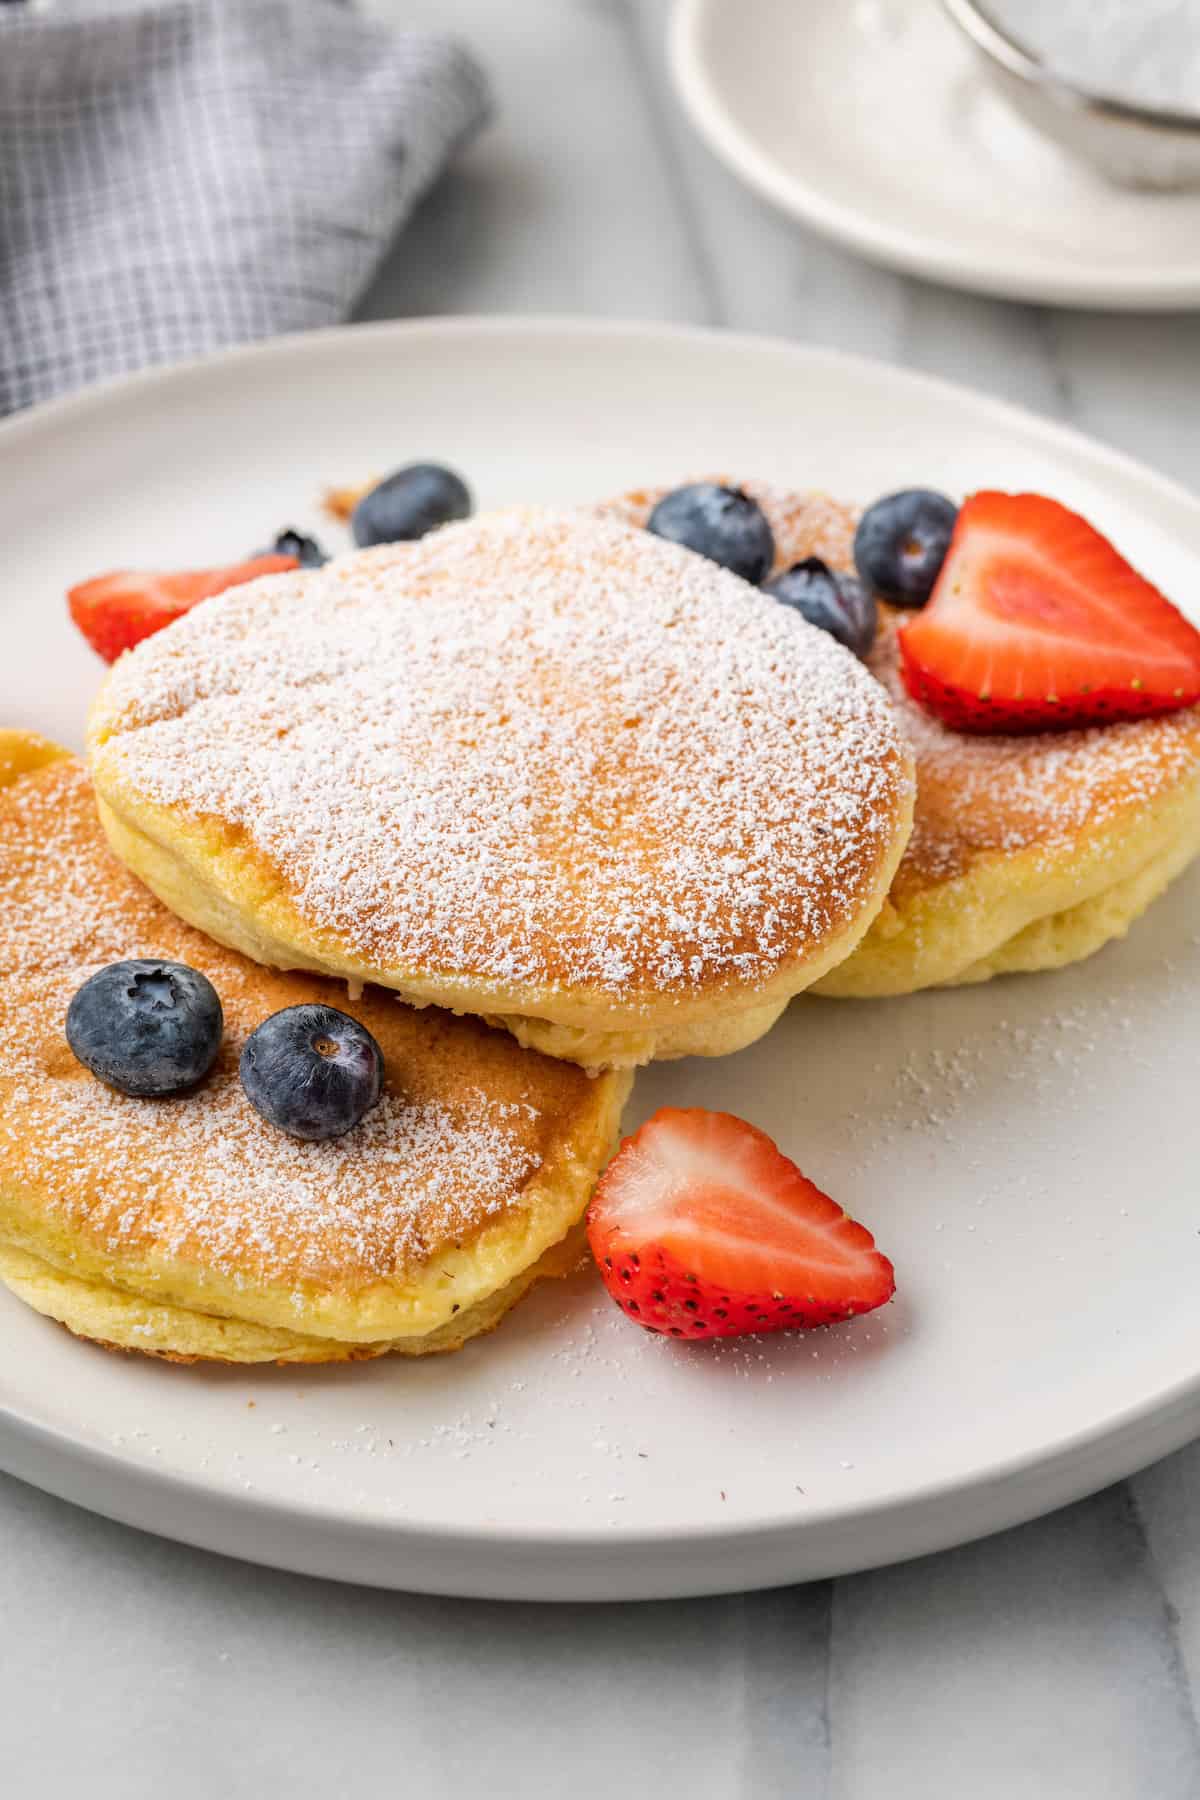 Gluten-free souffle pancakes on a plate, and dusted with powdered sugar and topped with strawberries and blueberries.